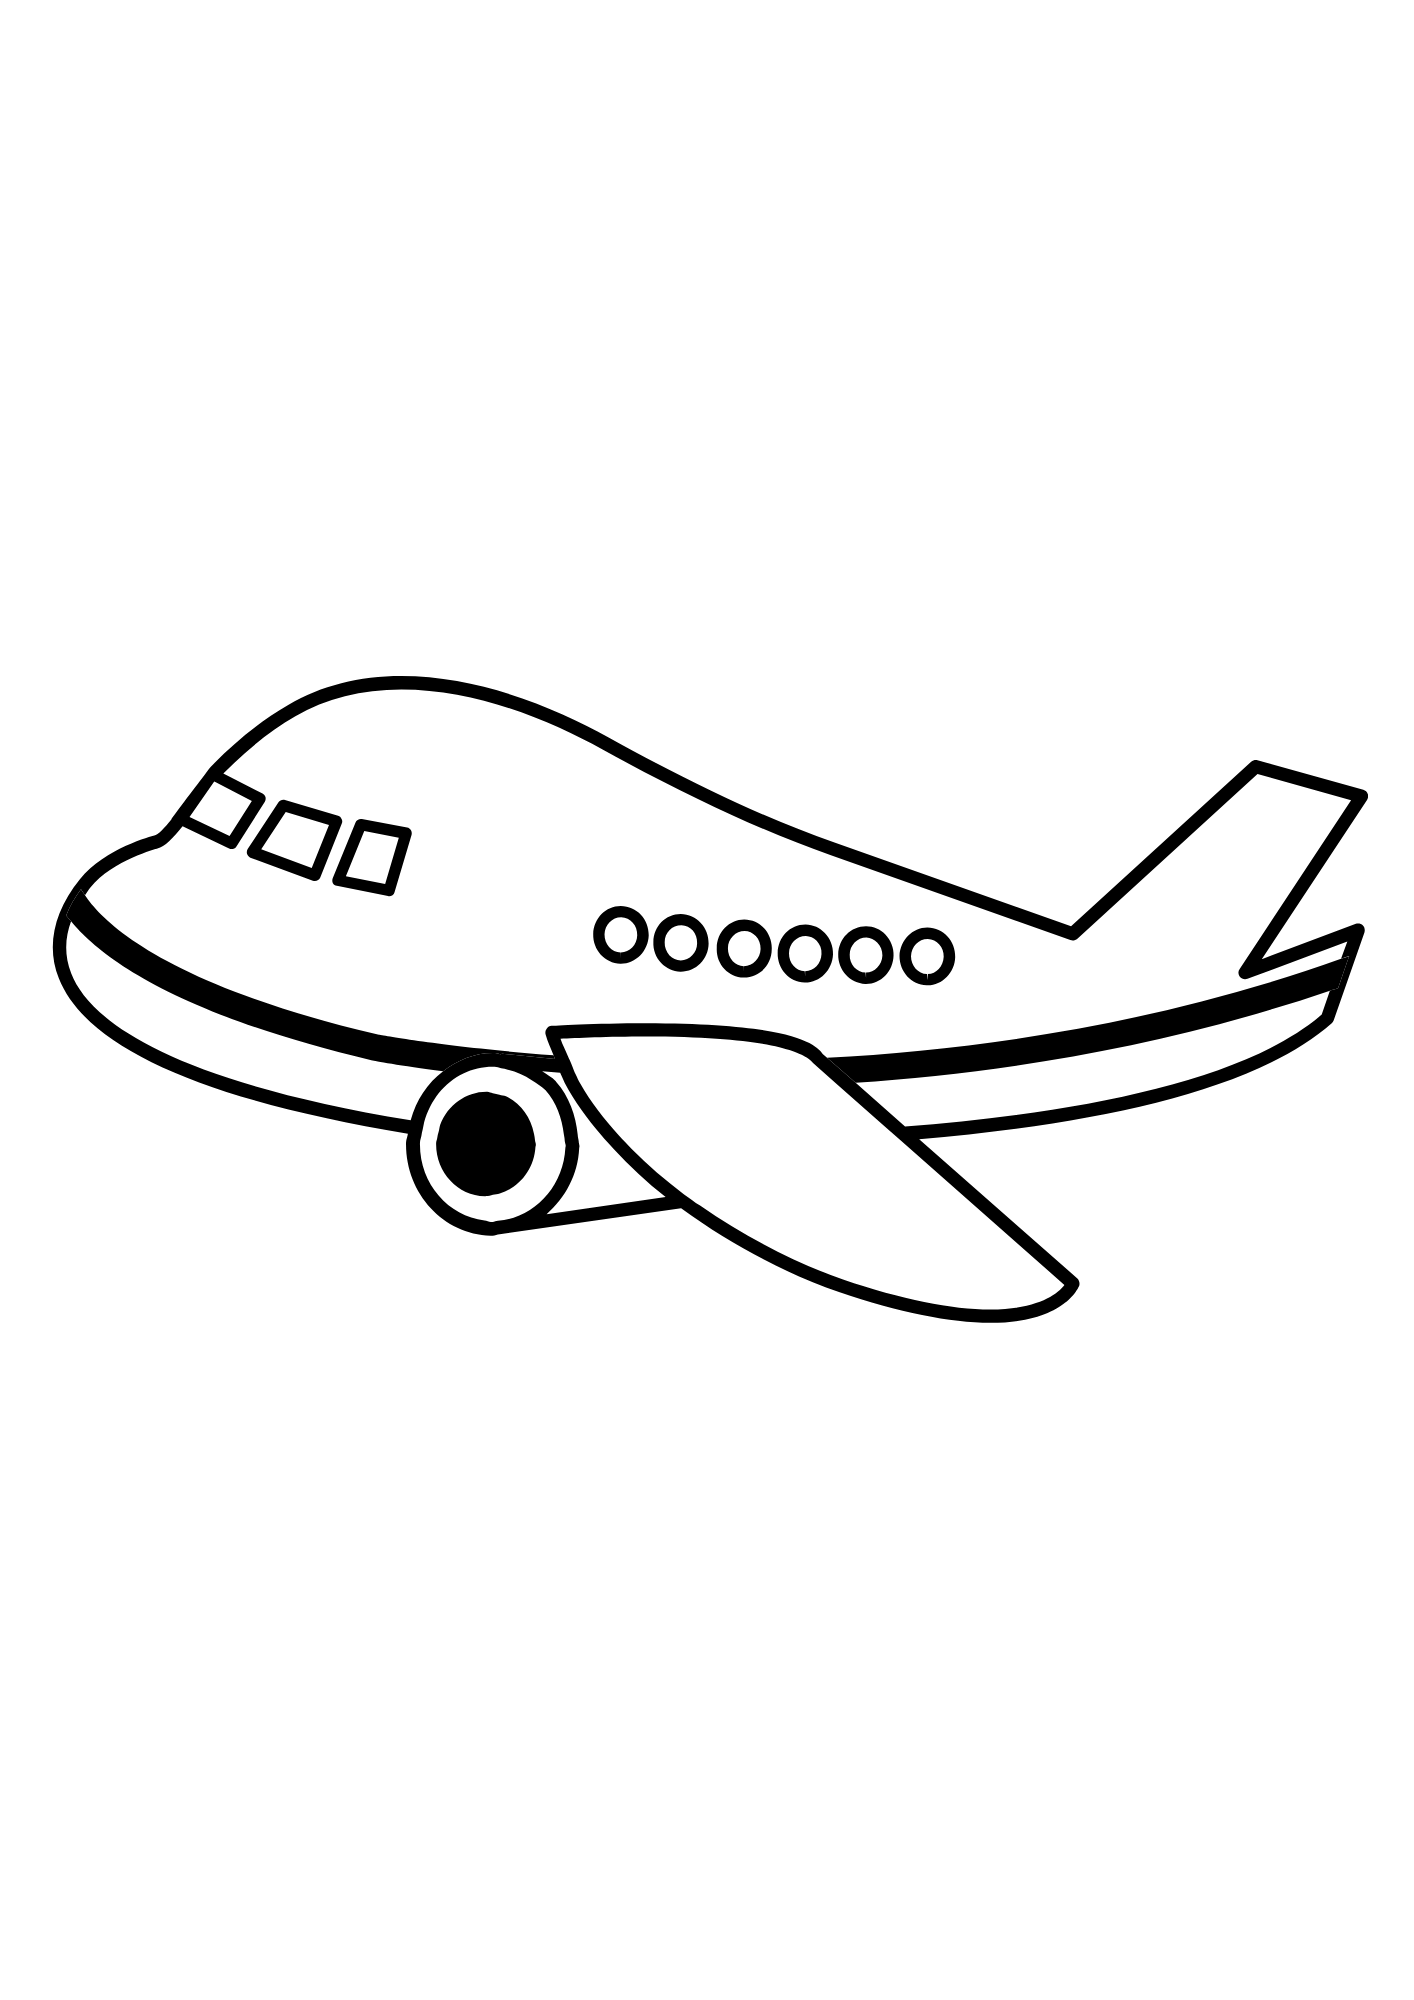 Airplane For Children Picture Coloring Pages